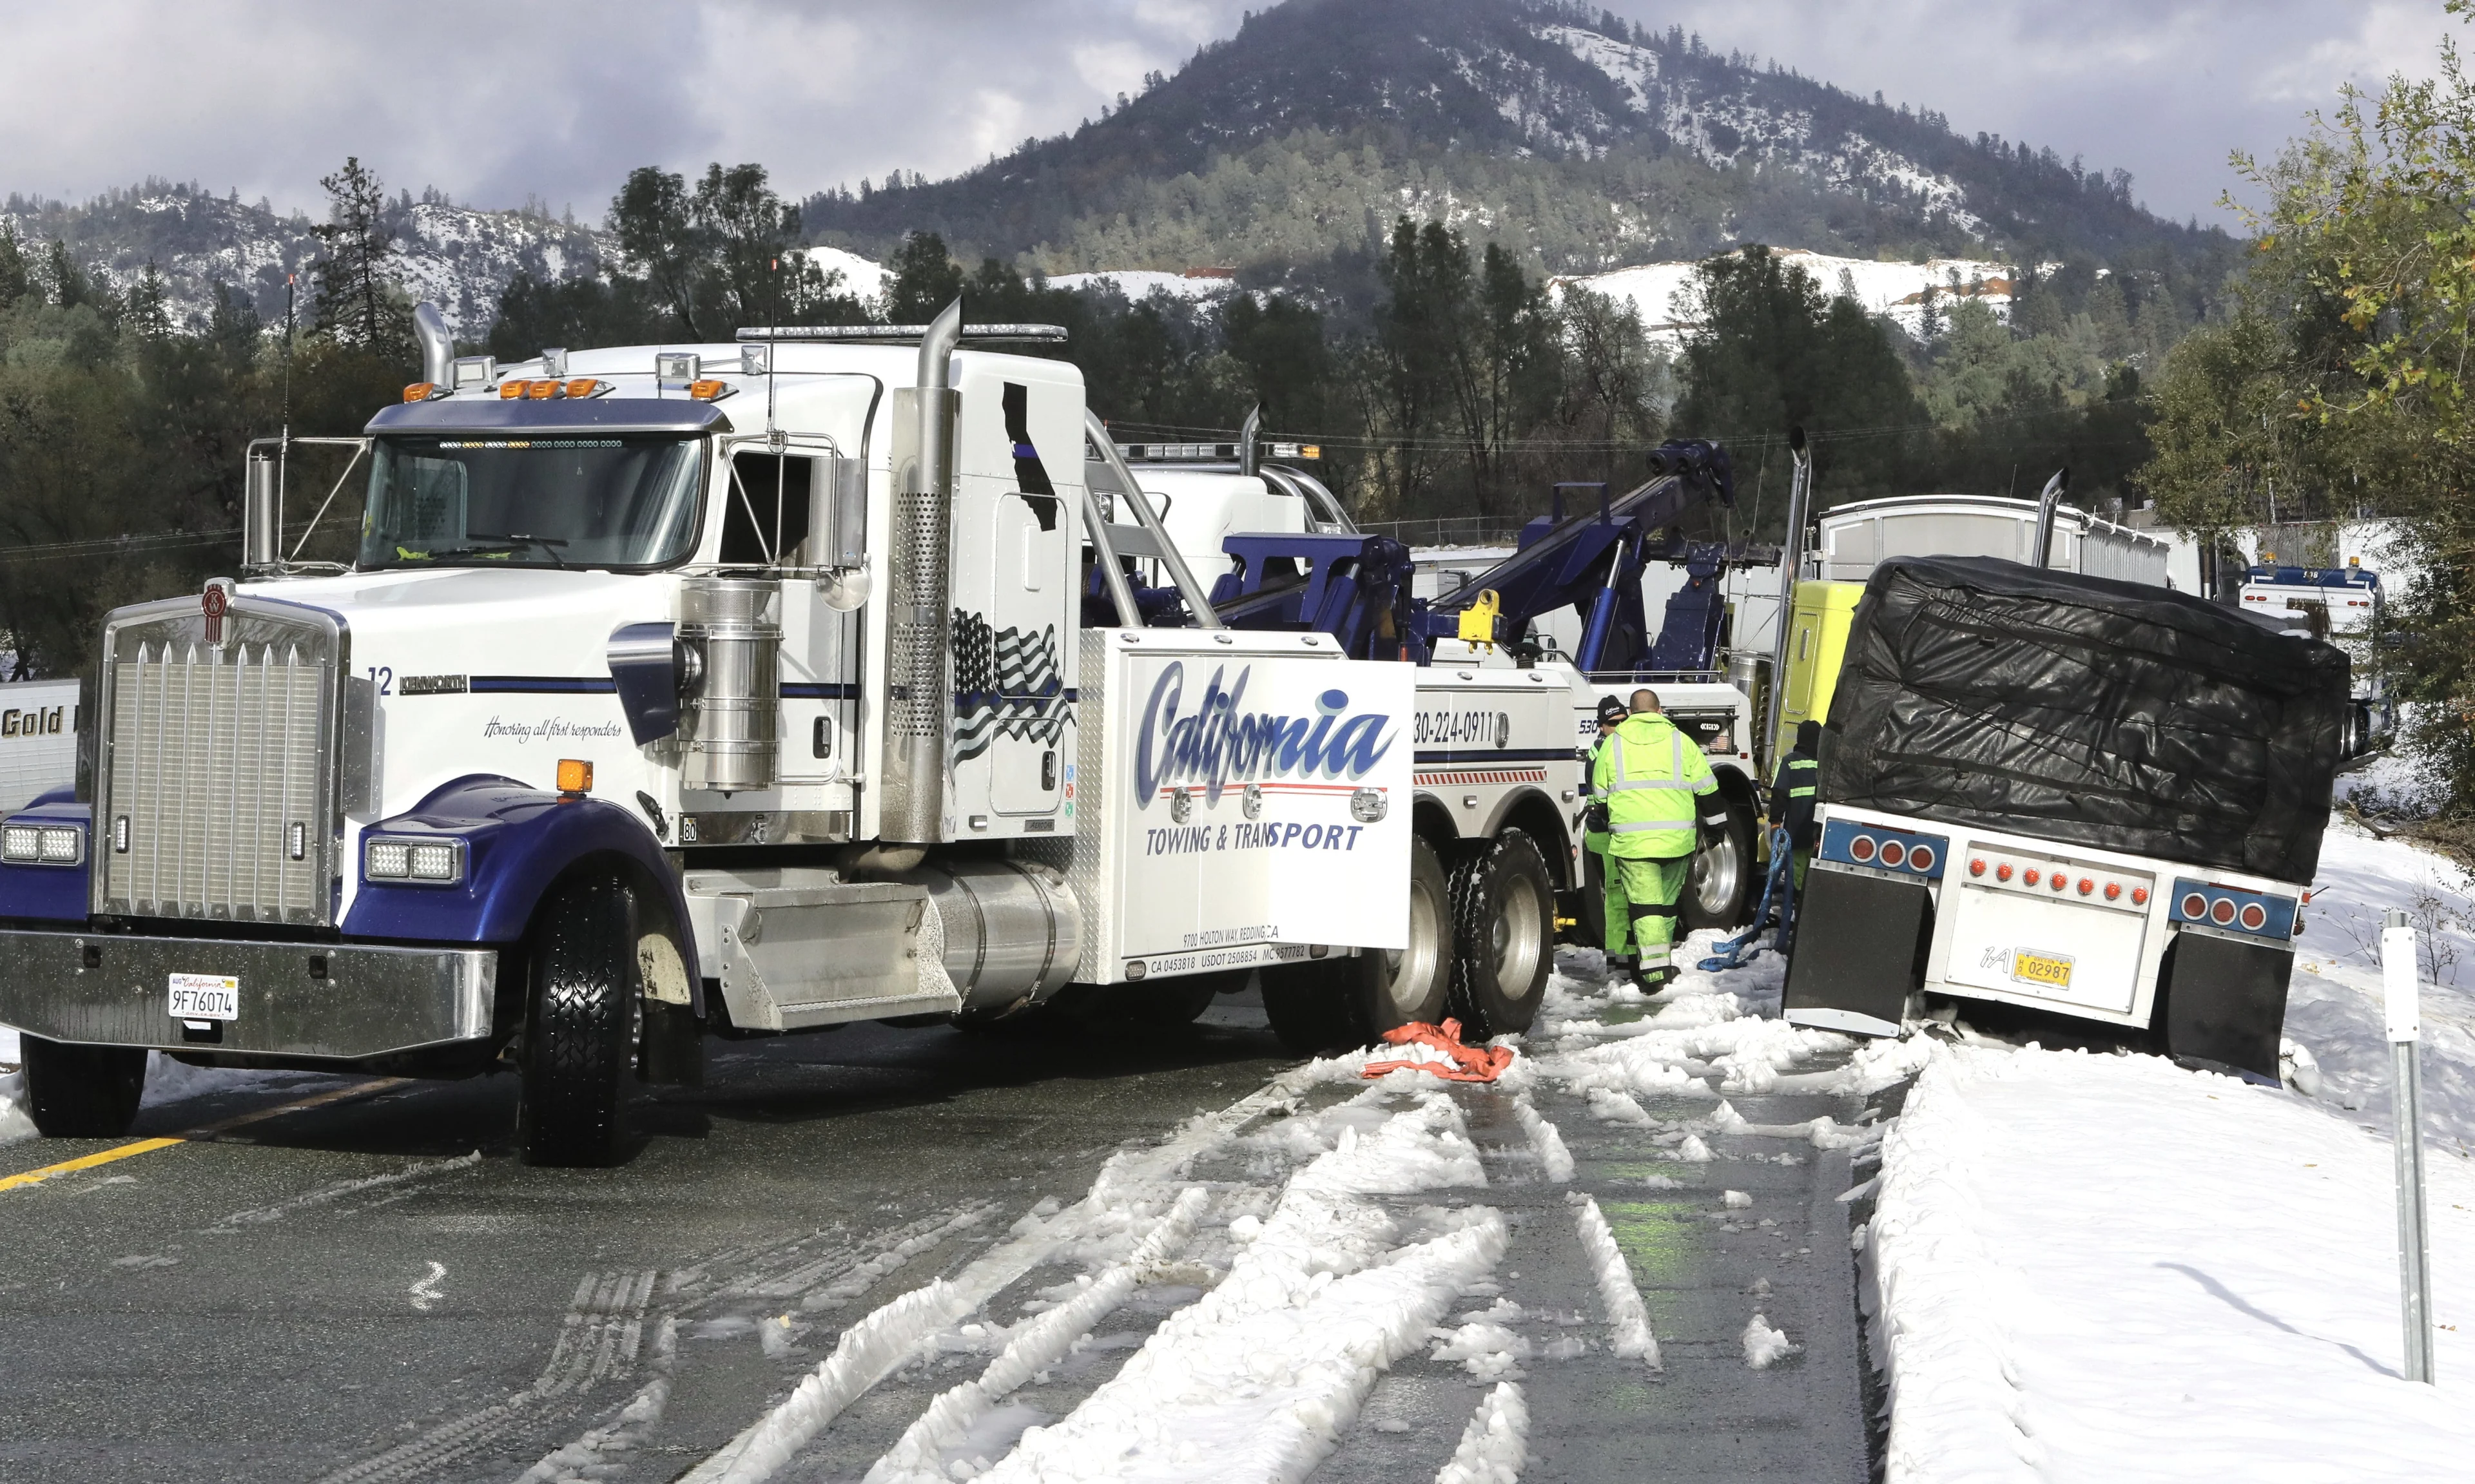 2019-11-28T002053Z 147053254 MT1USATODAY13719486 RTRMADP 3 TWO-TOW-TRUCKS-WERE-NEEDED-TO-PULL-A-TRUCK-OUT-OF-THE-SNOW